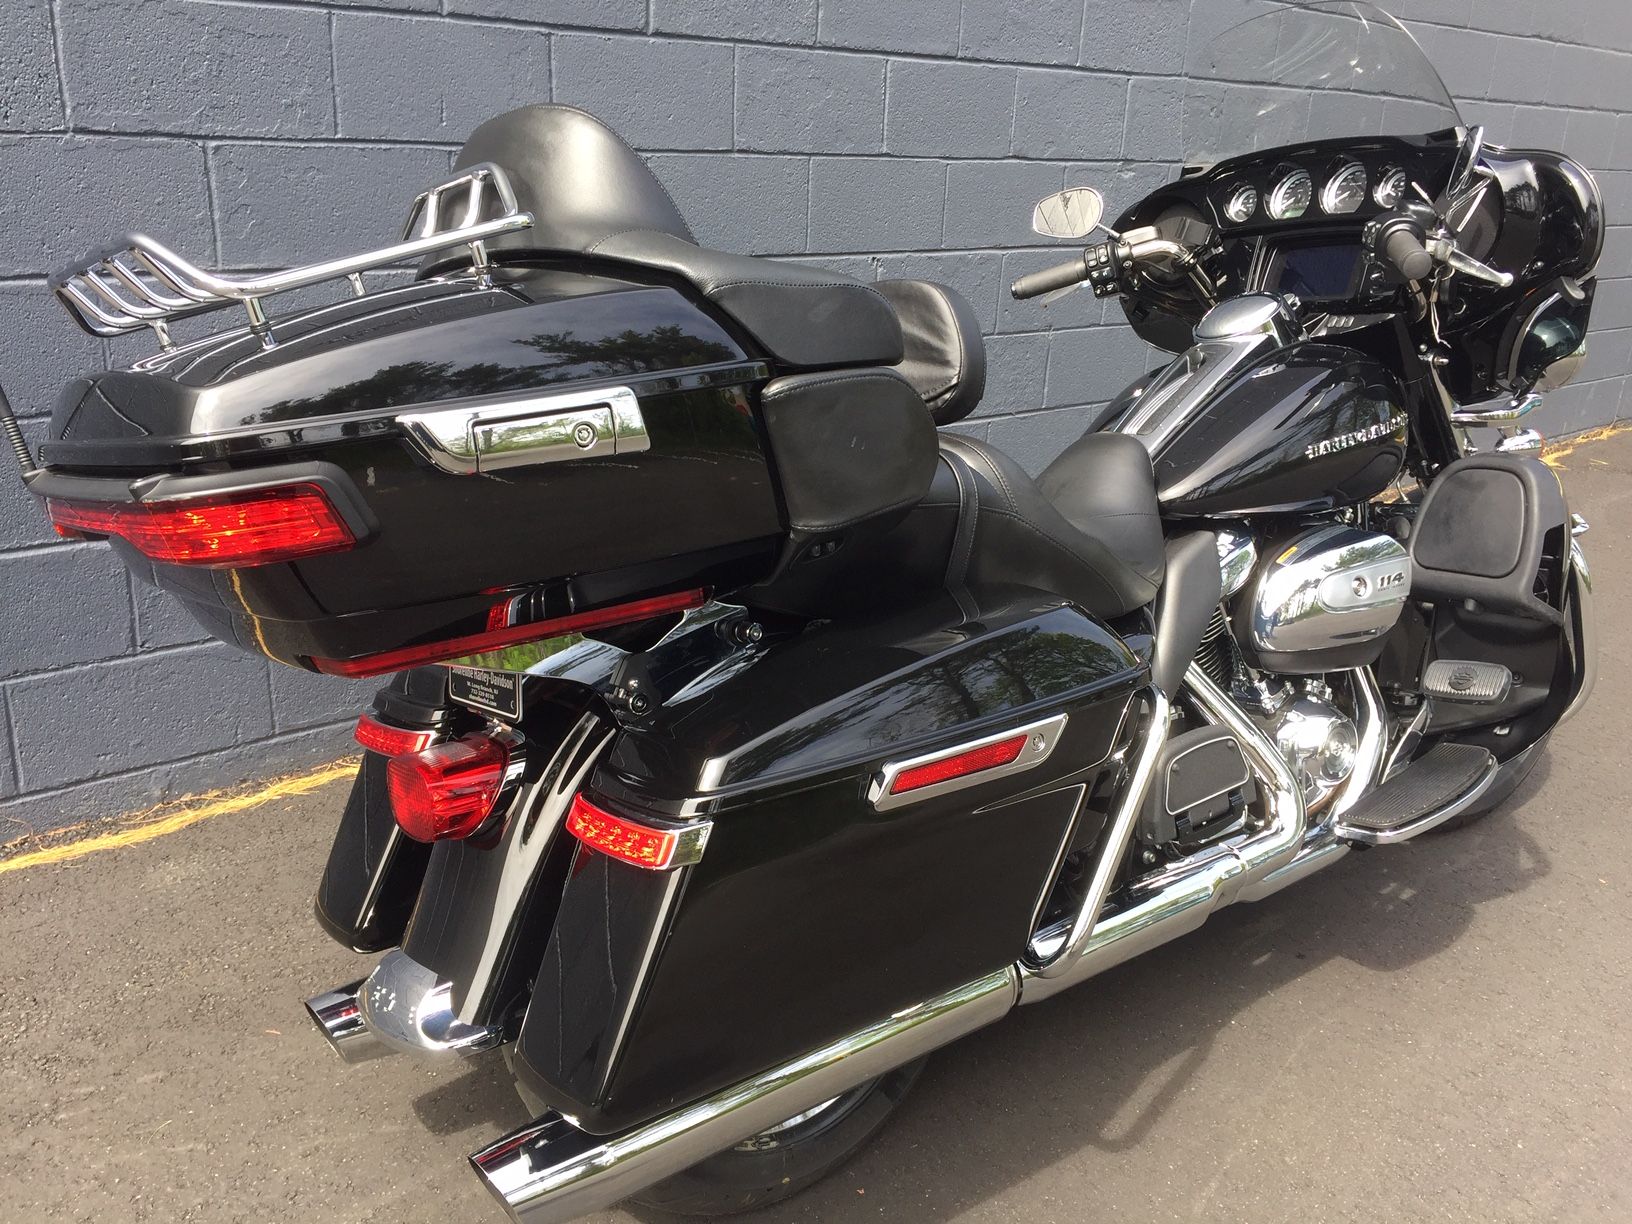 2019 Harley-Davidson ULTRA LIMITED in West Long Branch, New Jersey - Photo 3